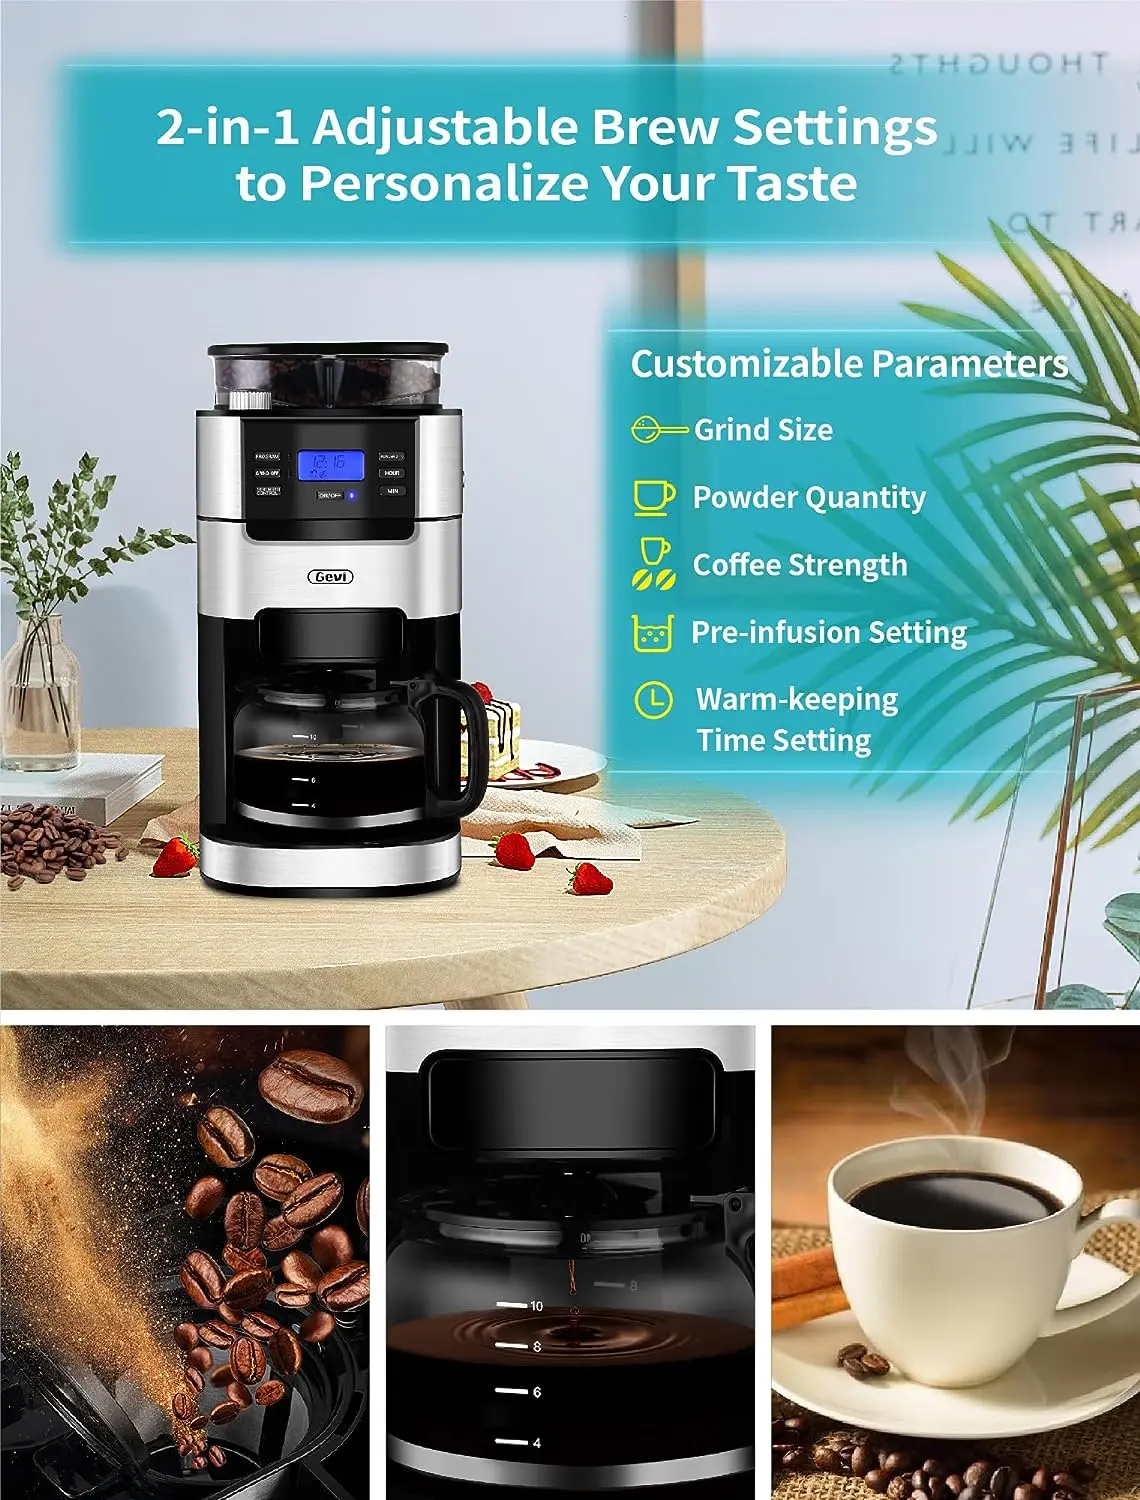 https://ae01.alicdn.com/kf/Se7d37421465e4a79b0b3f5e6f51998e6g/Drip-Coffee-Maker-Brew-Automatic-Coffee-Machine-with-Built-In-Burr-Coffee-Grinder-Programmable-Timer-Mode.jpg